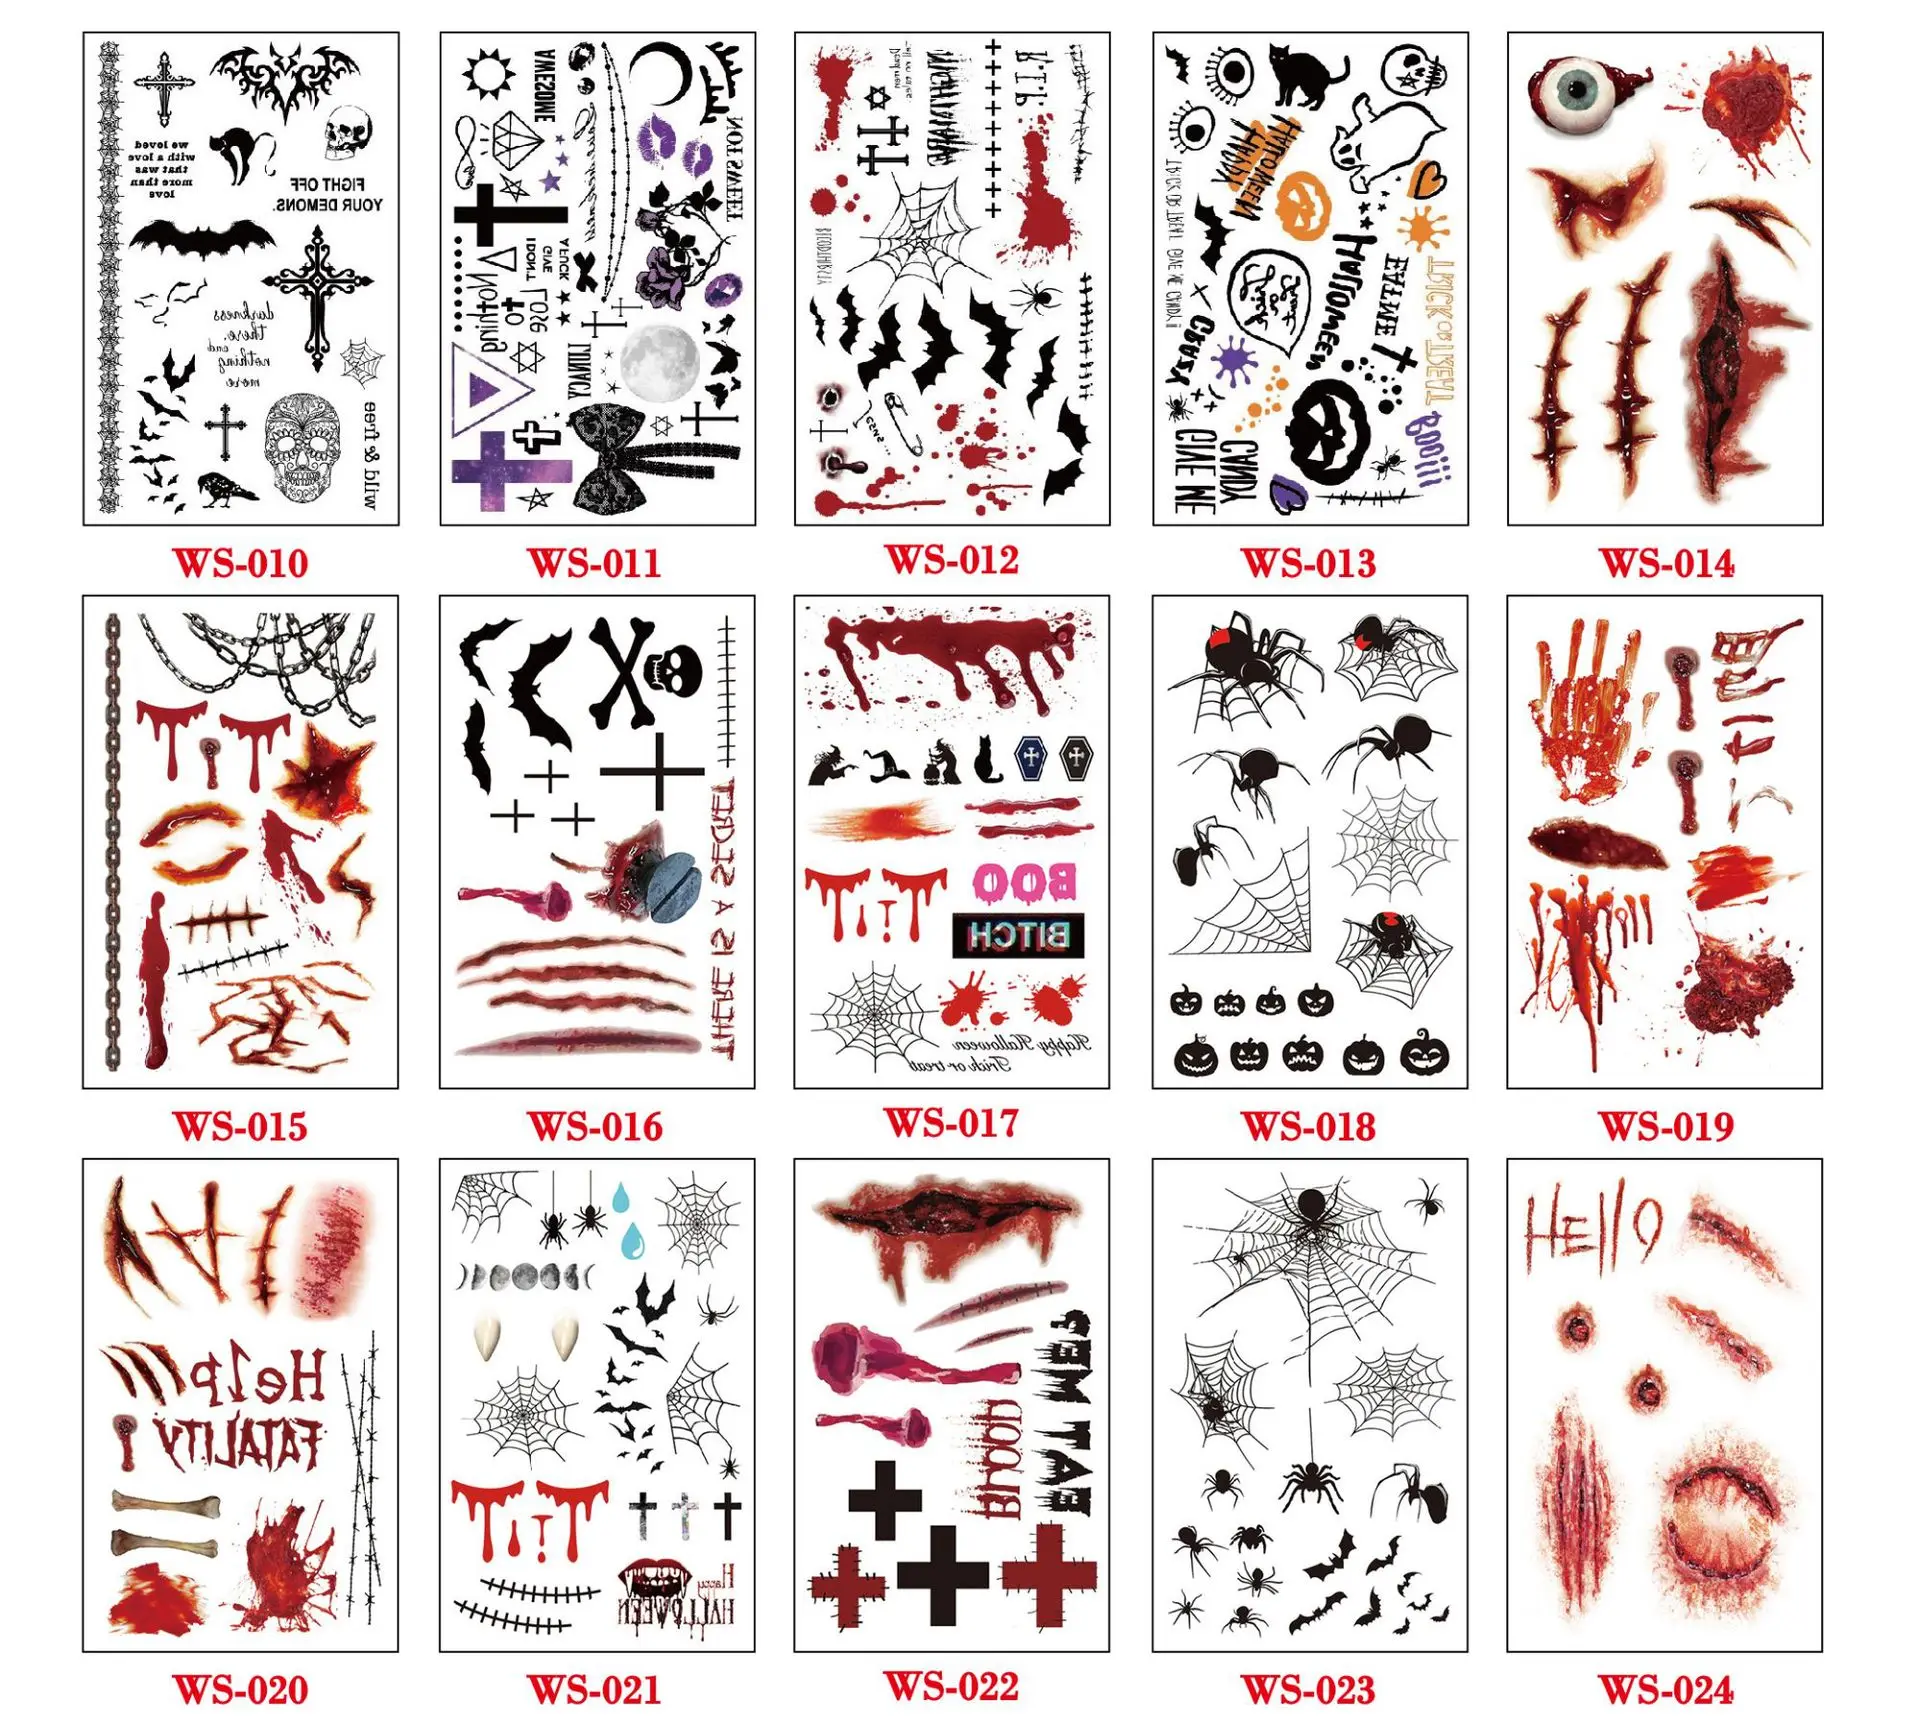 3D Halloween Party Fake Blood Tattoo Stickers Waterproof For Adults Face Temporary Tattoos